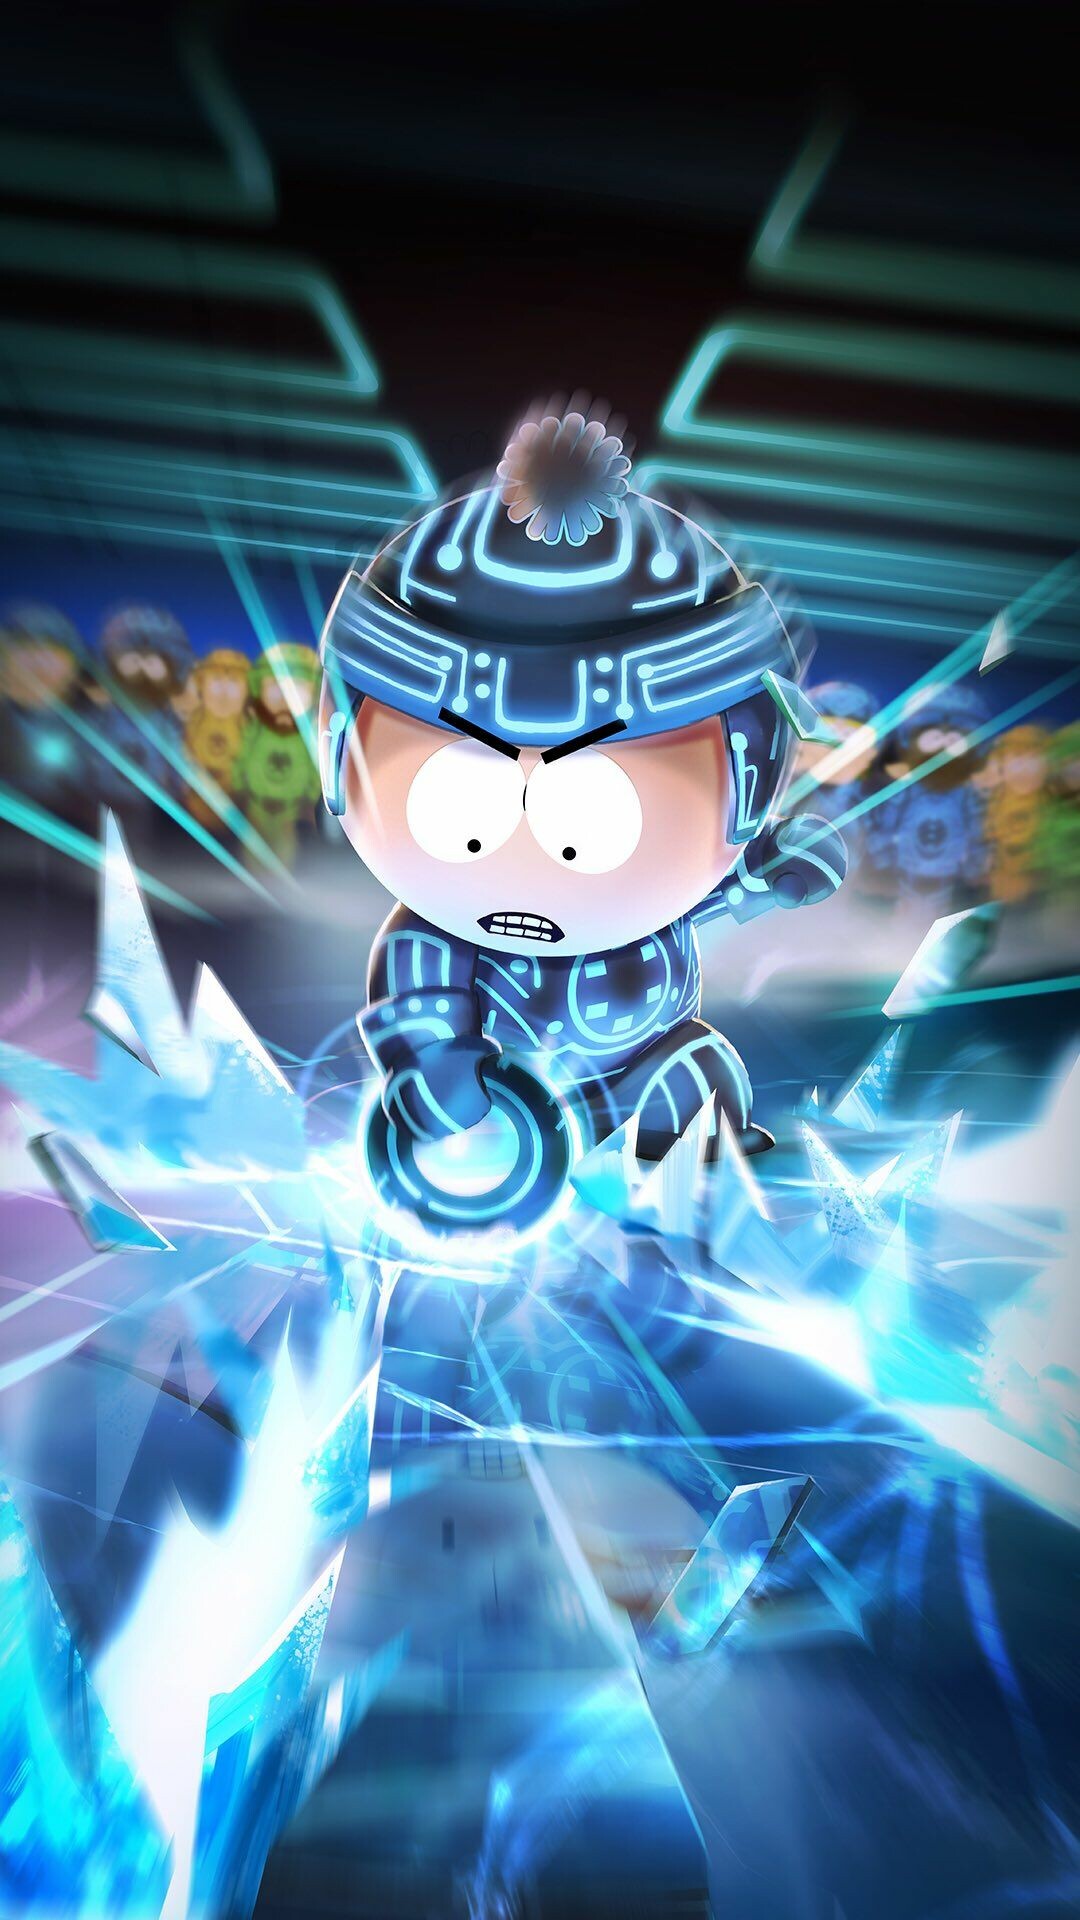 South Park: Phone Destroyer, Program Stan, The Sci-Fi theme. 1080x1920 Full HD Background.